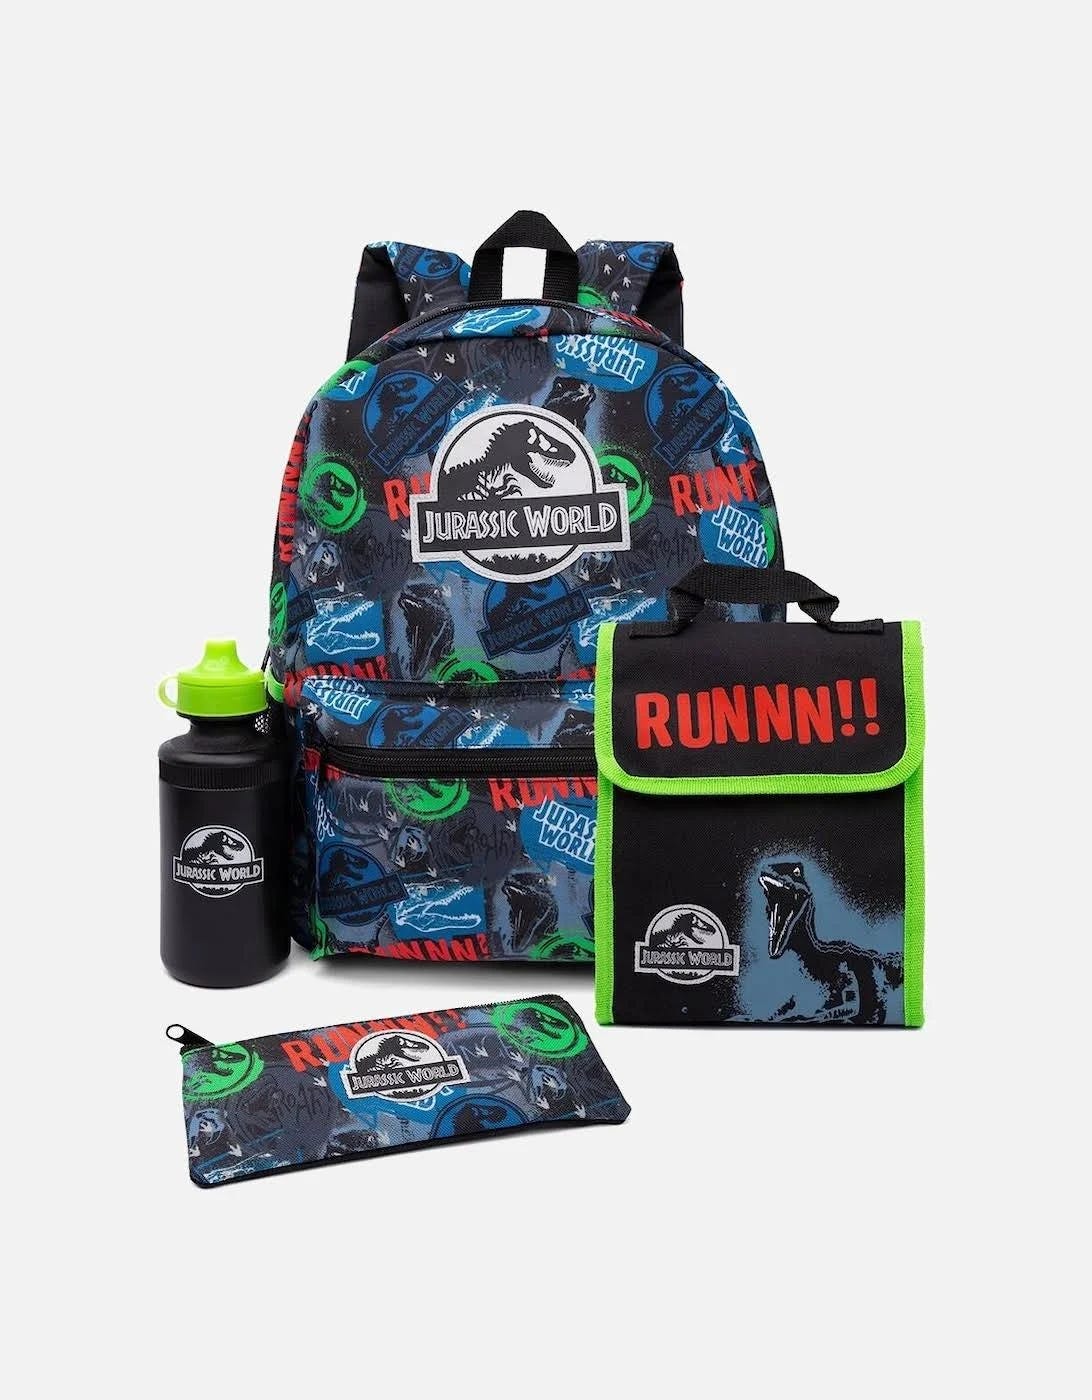 Jurassic World Backpack - Perfect for School or Fun Outings | Image